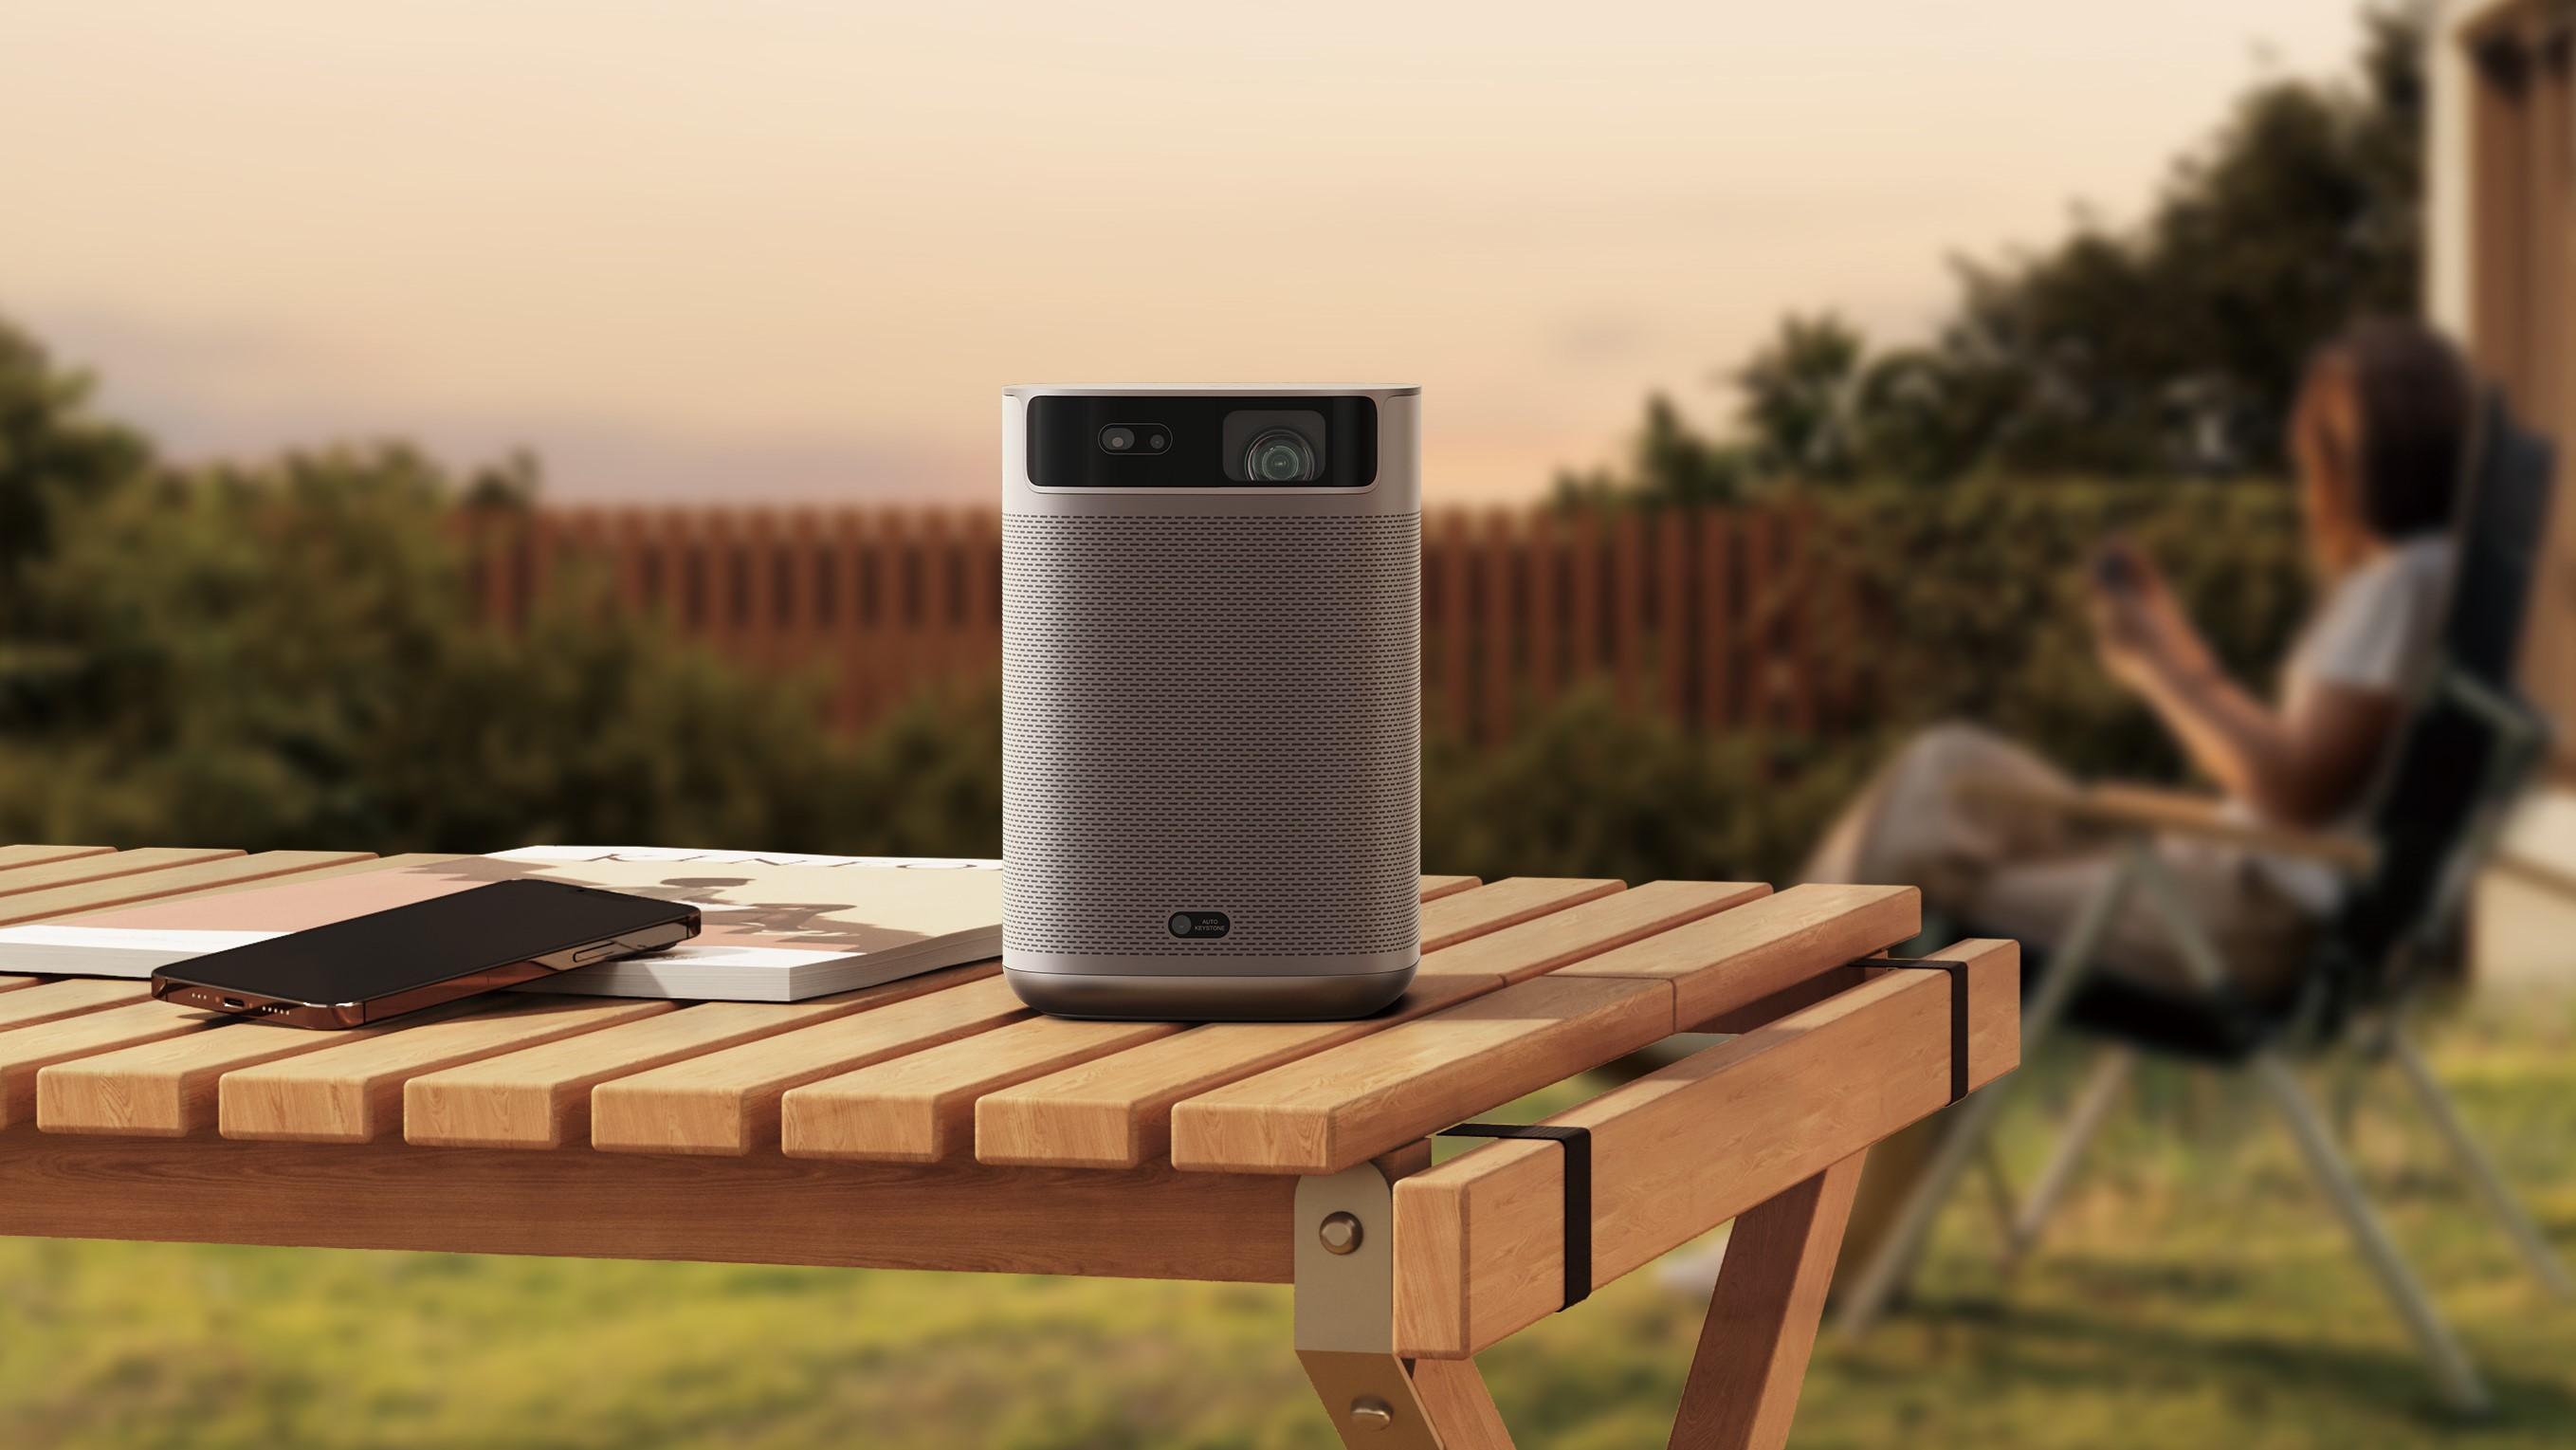 Xgimi MoGo 2 Pro on table outdoors with trees in background